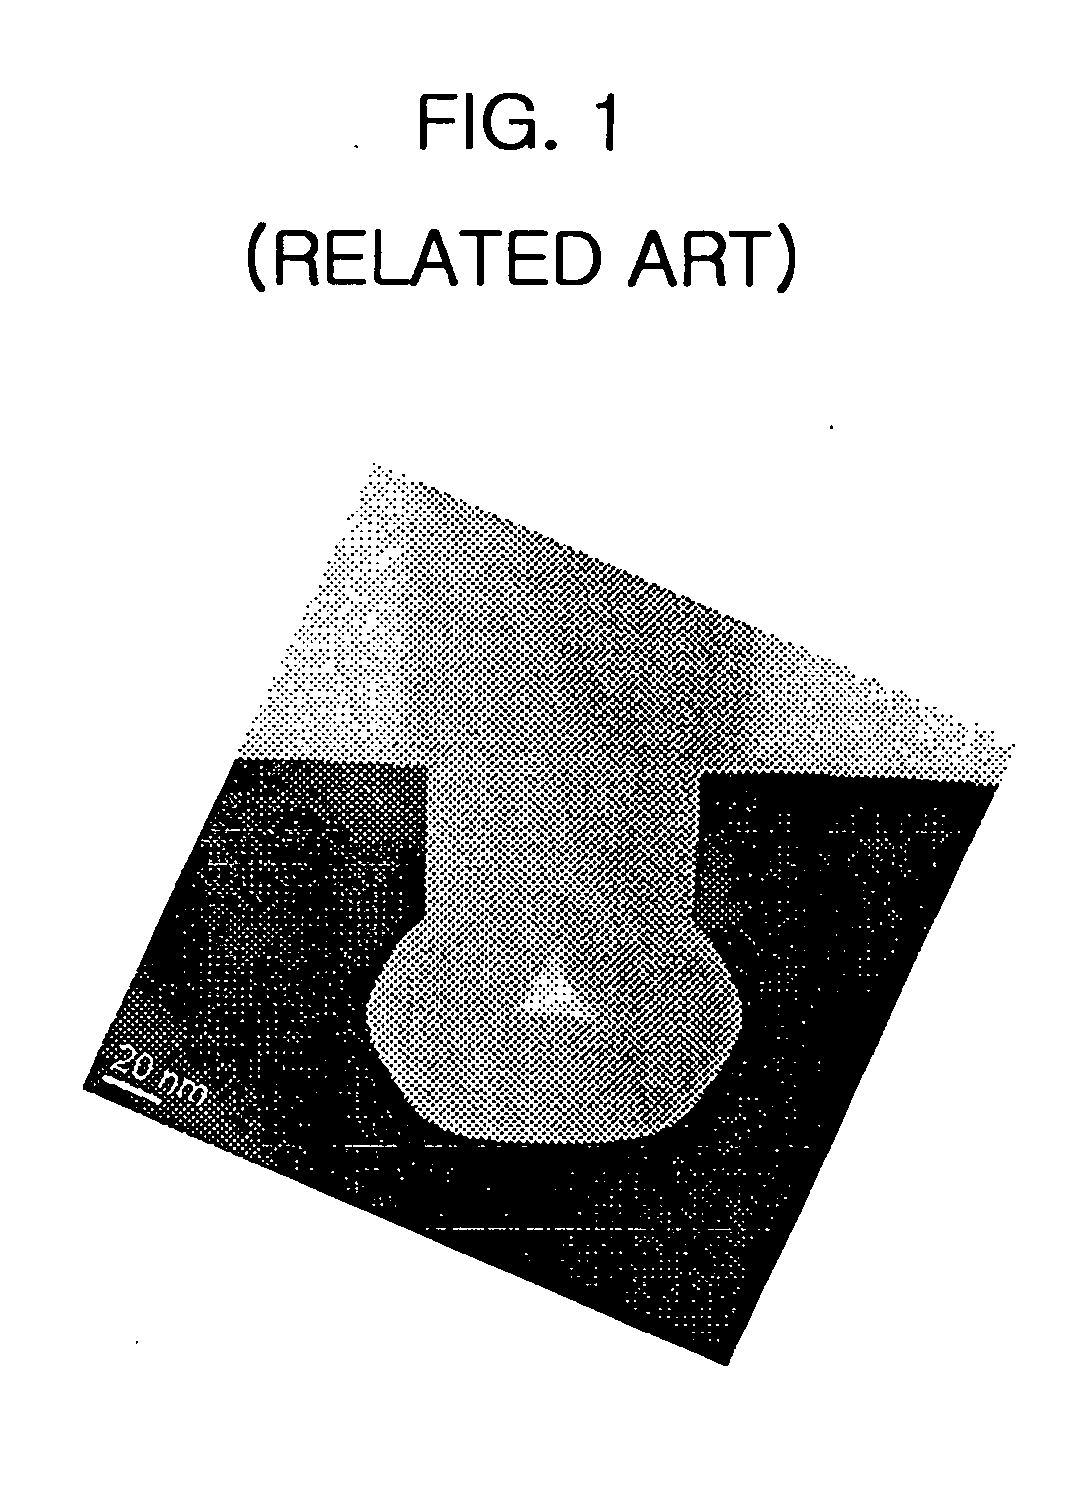 Method for fabricating semiconductor device with bulb shaped recess gate pattern